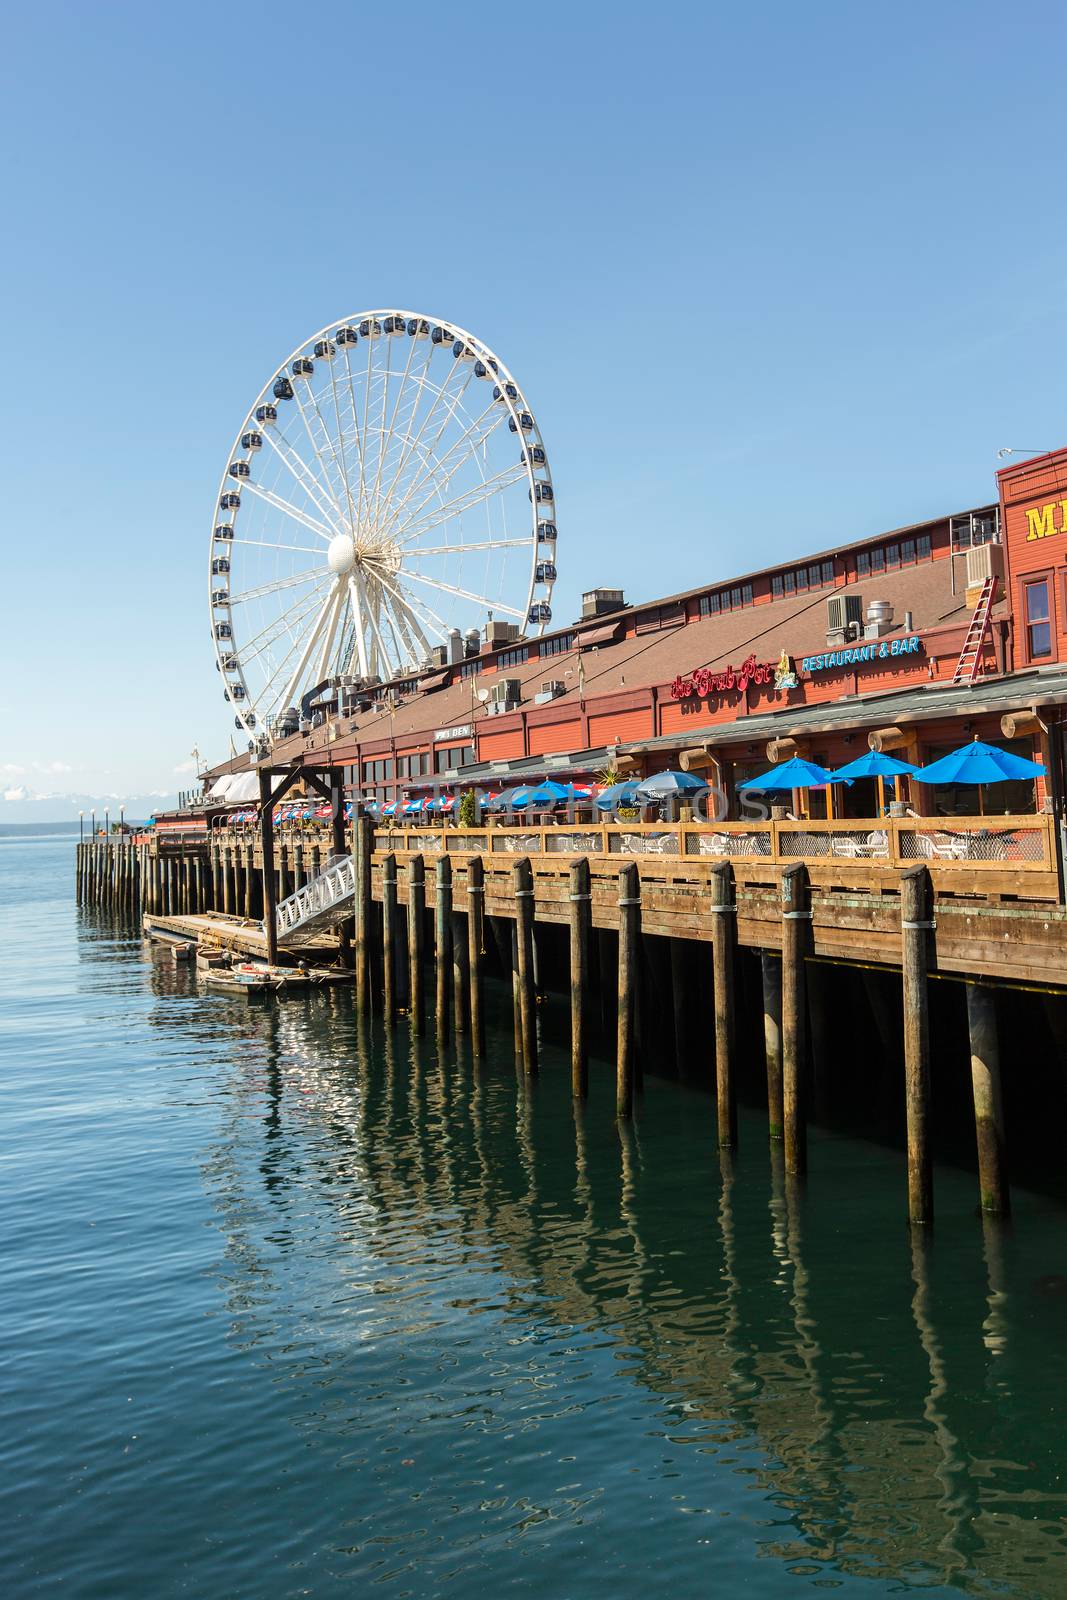 Businesses Attractions Along Seattle Waterfornt by Creatista